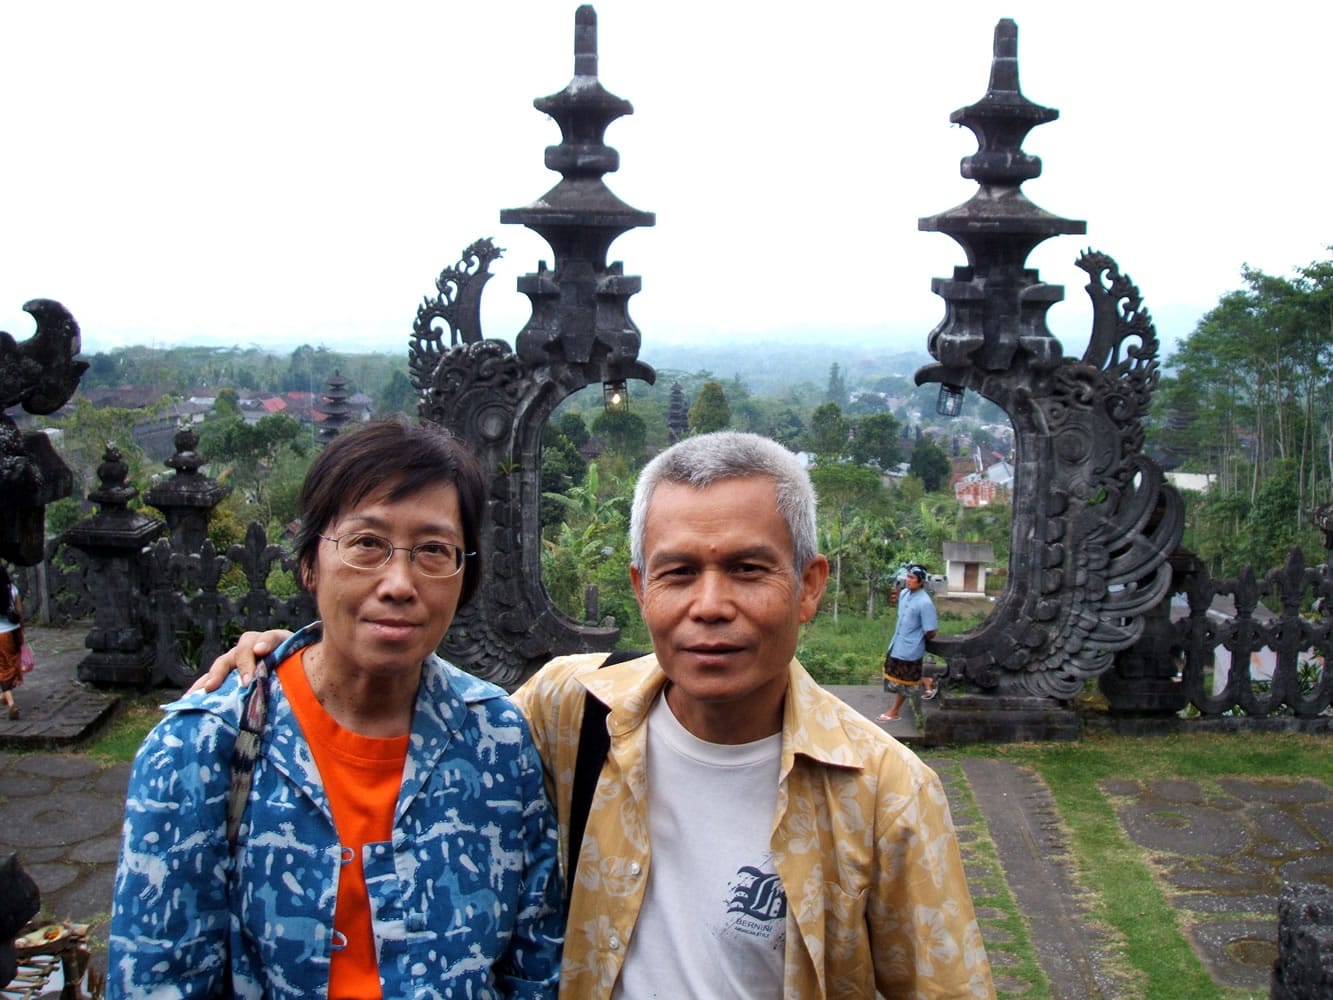 Family Photo of Sombath Somphone
Lao leading civil rights activist Sombath Somphone, right, with his wife Shui-Meng poses  Sept. 16, 2005, during their holiday trip in Bali, Indonesia.